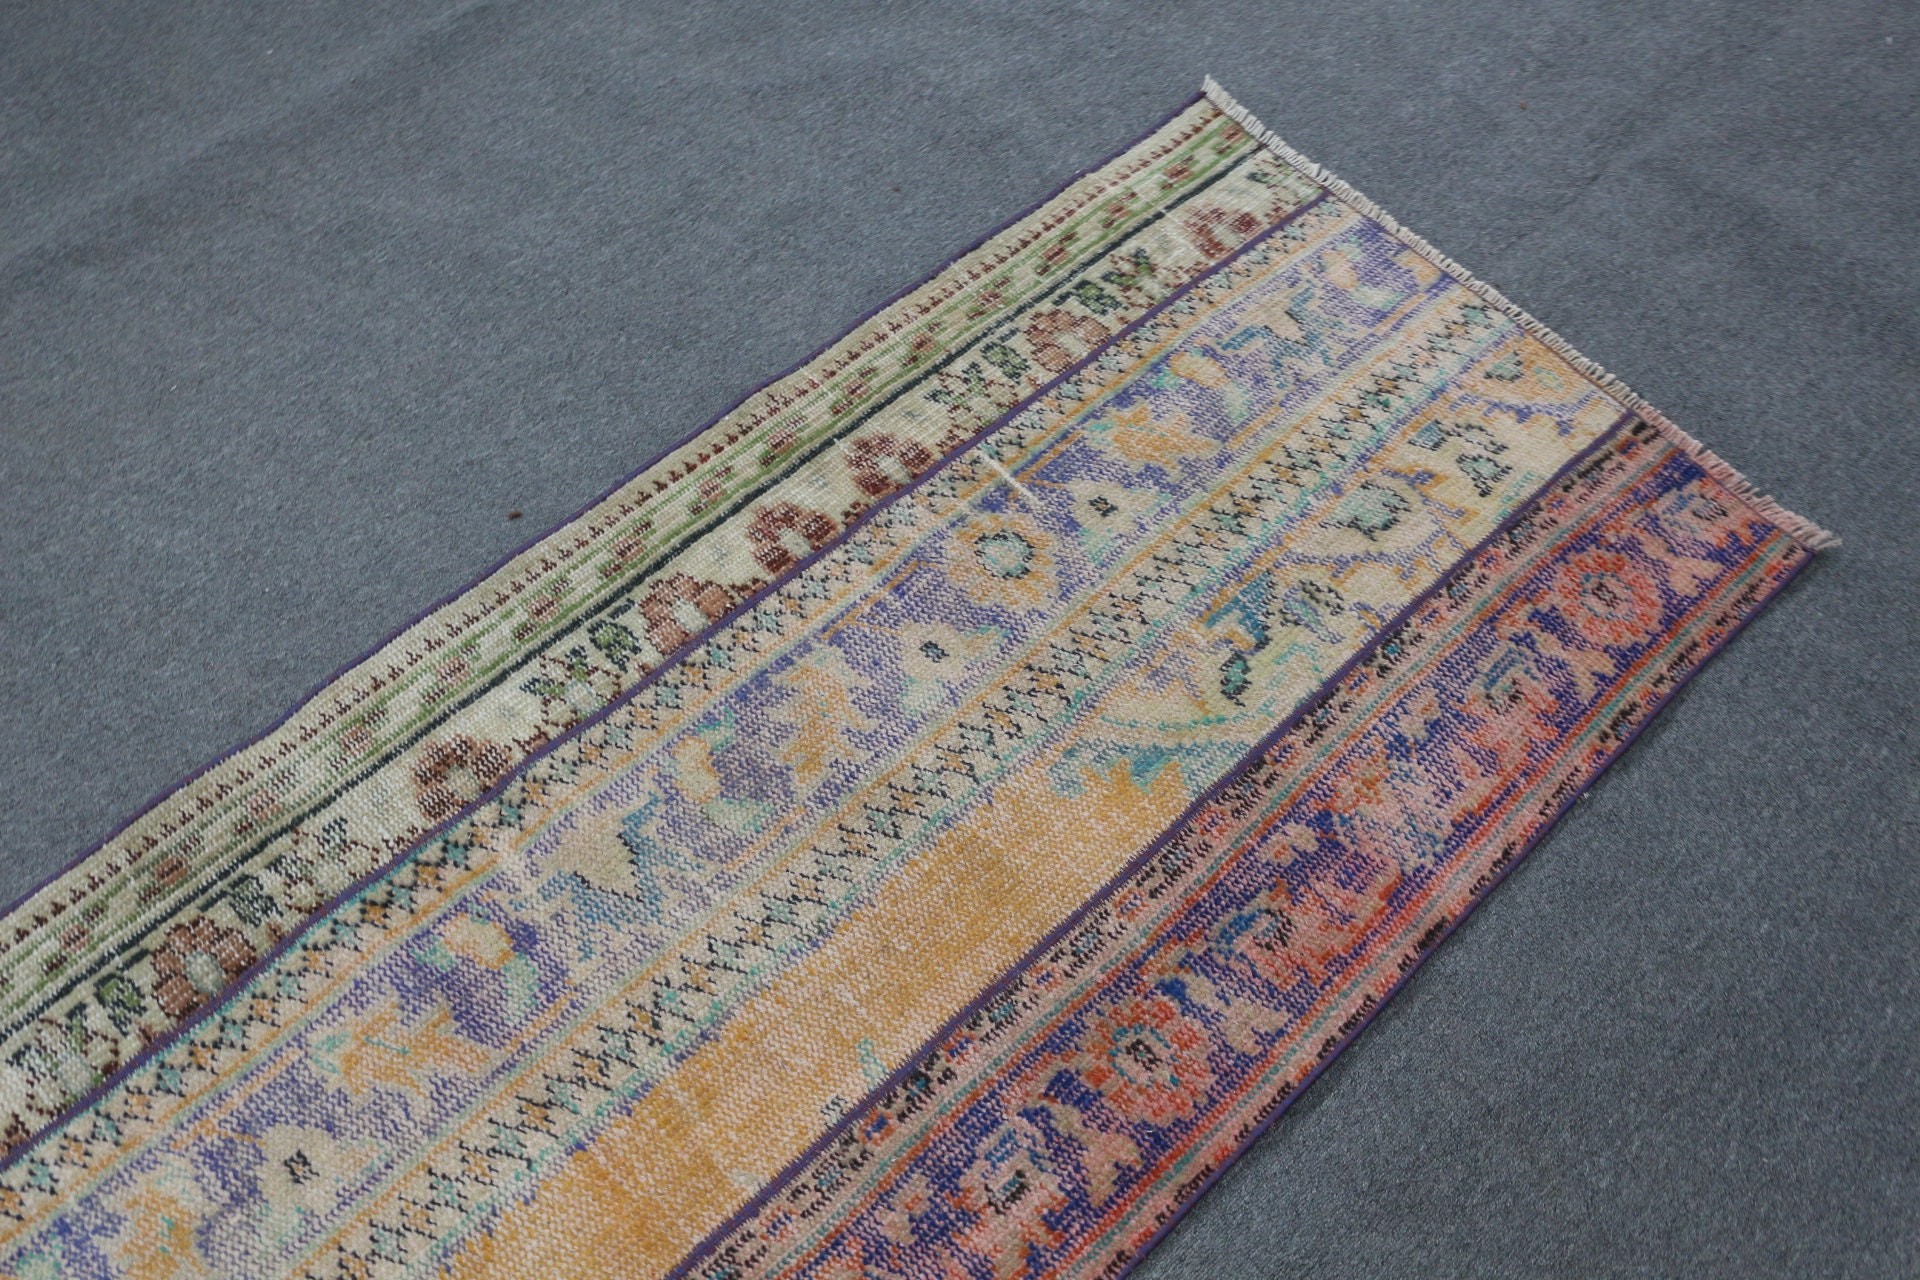 2.6x7.6 ft Runner Rugs, Rugs for Stair, Old Rug, Turkish Rug, Vintage Rugs, Hallway Rug, Home Decor Rug, Blue Kitchen Rugs